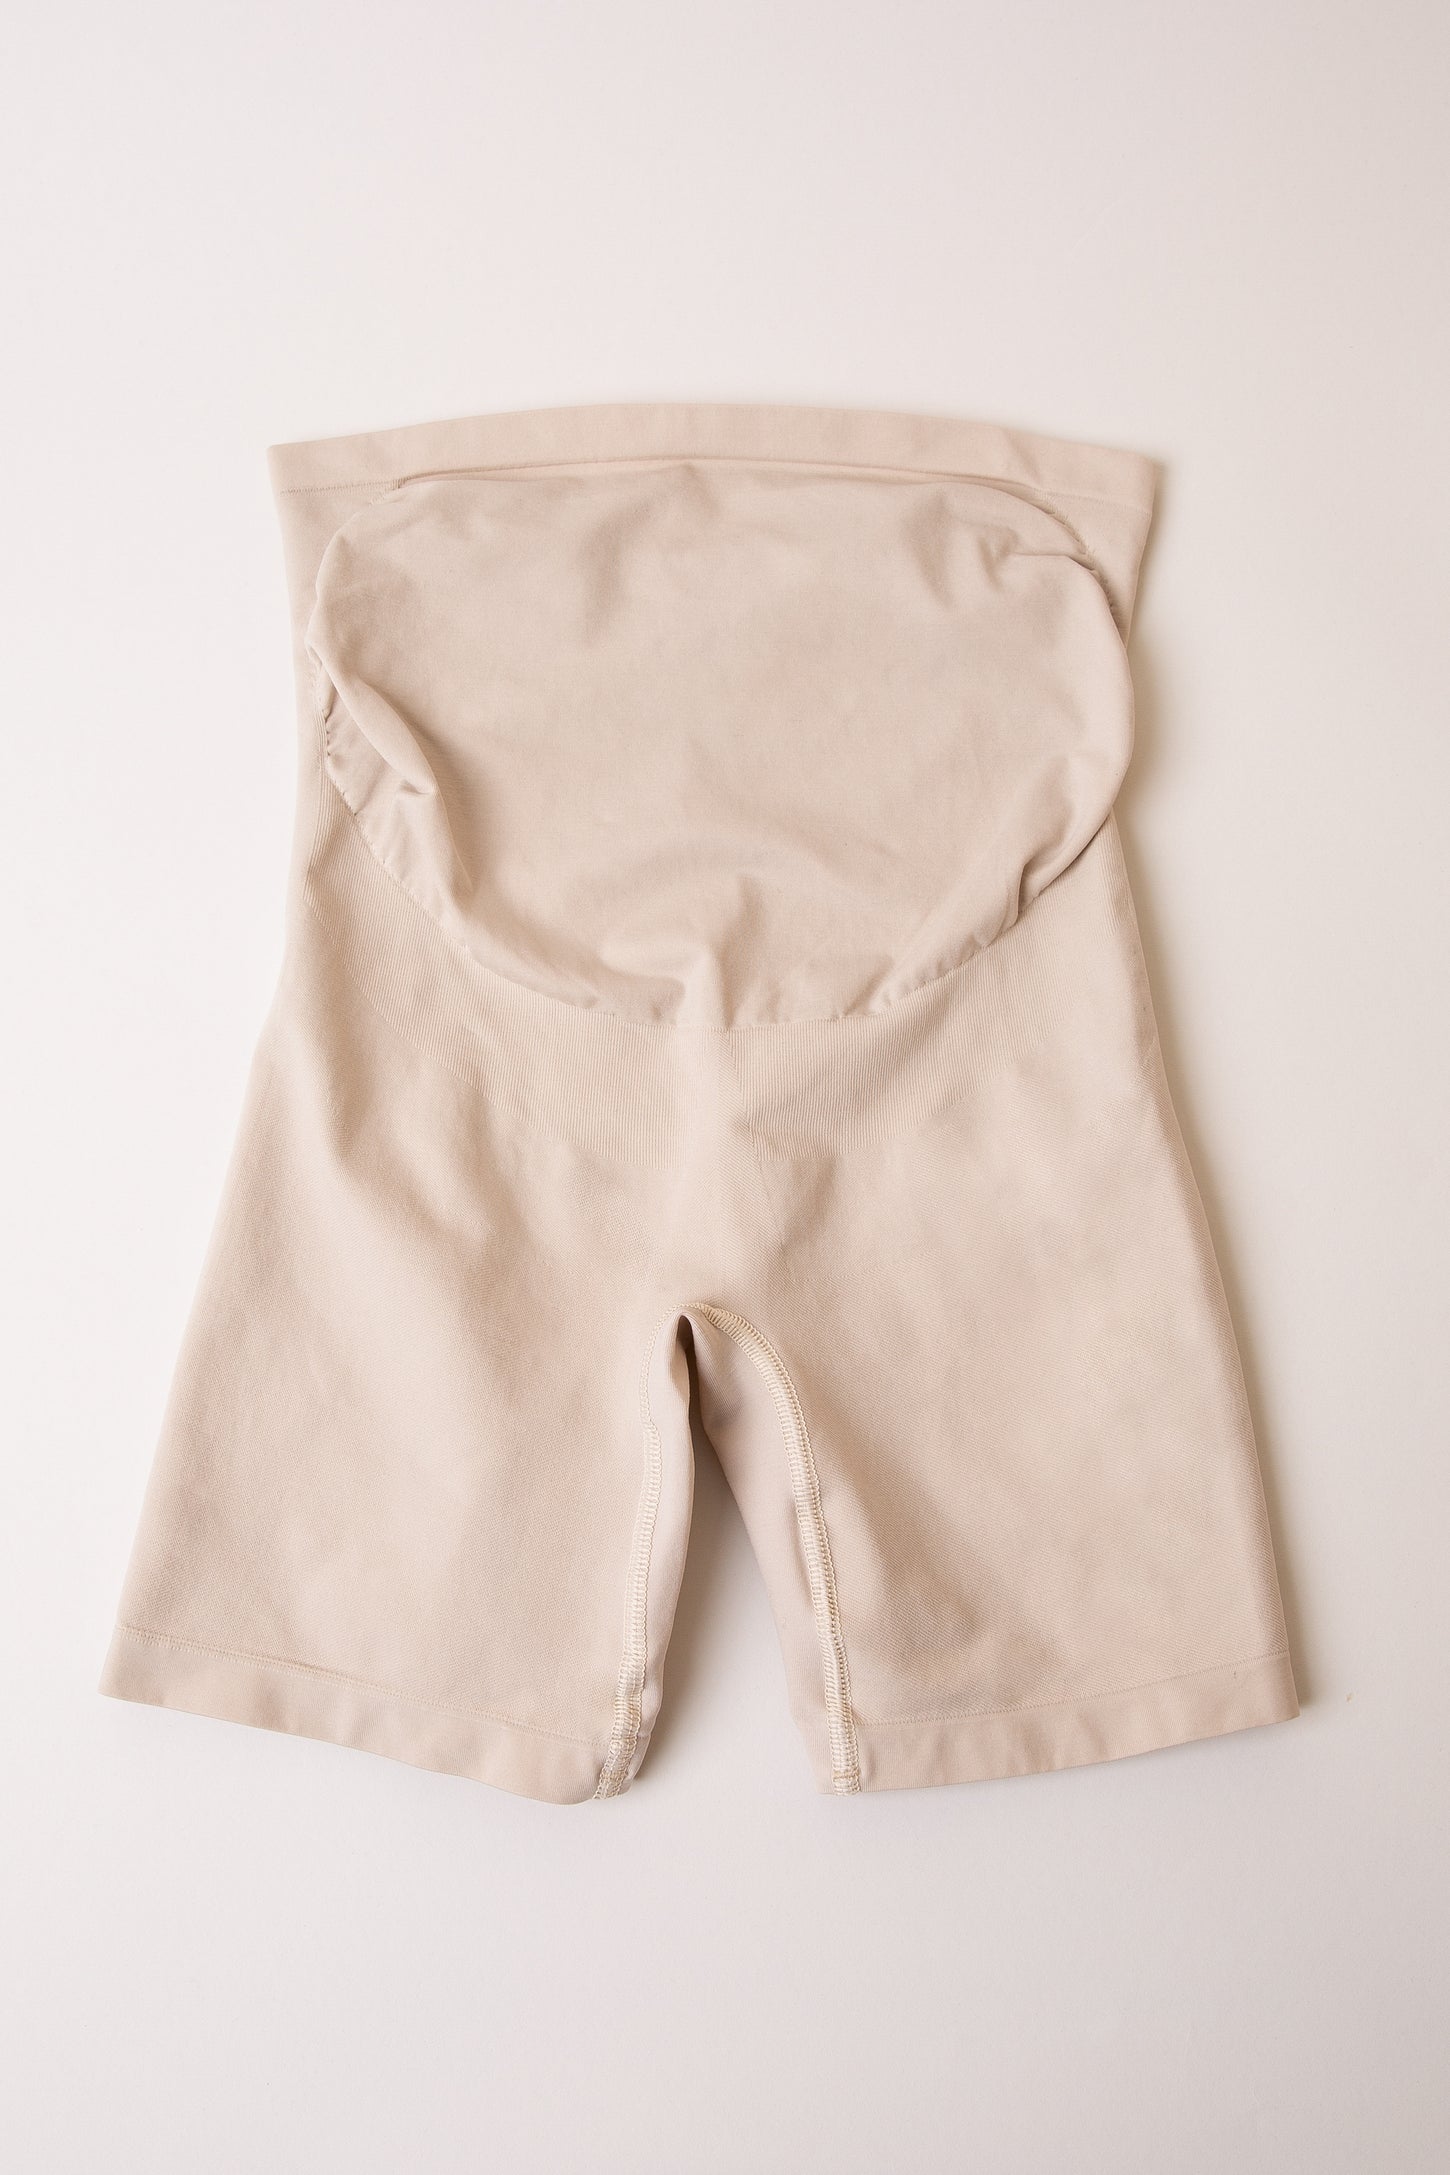 Beige Belly Bandit Thighs Disguise Maternity Support Shorts– PinkBlush